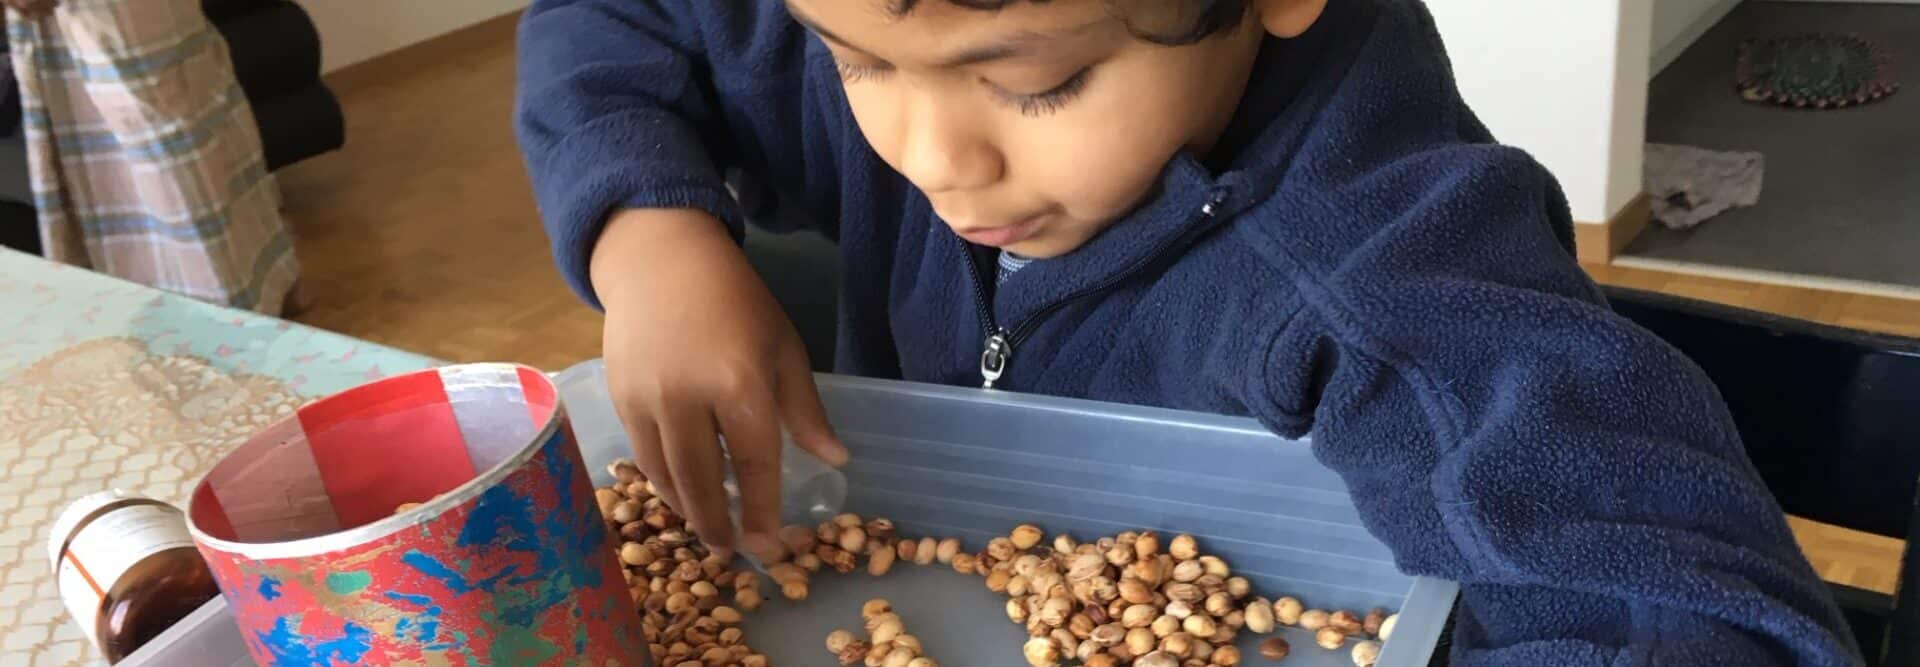 Boy sits at the table and explores and plays with cherry stones fascinated.